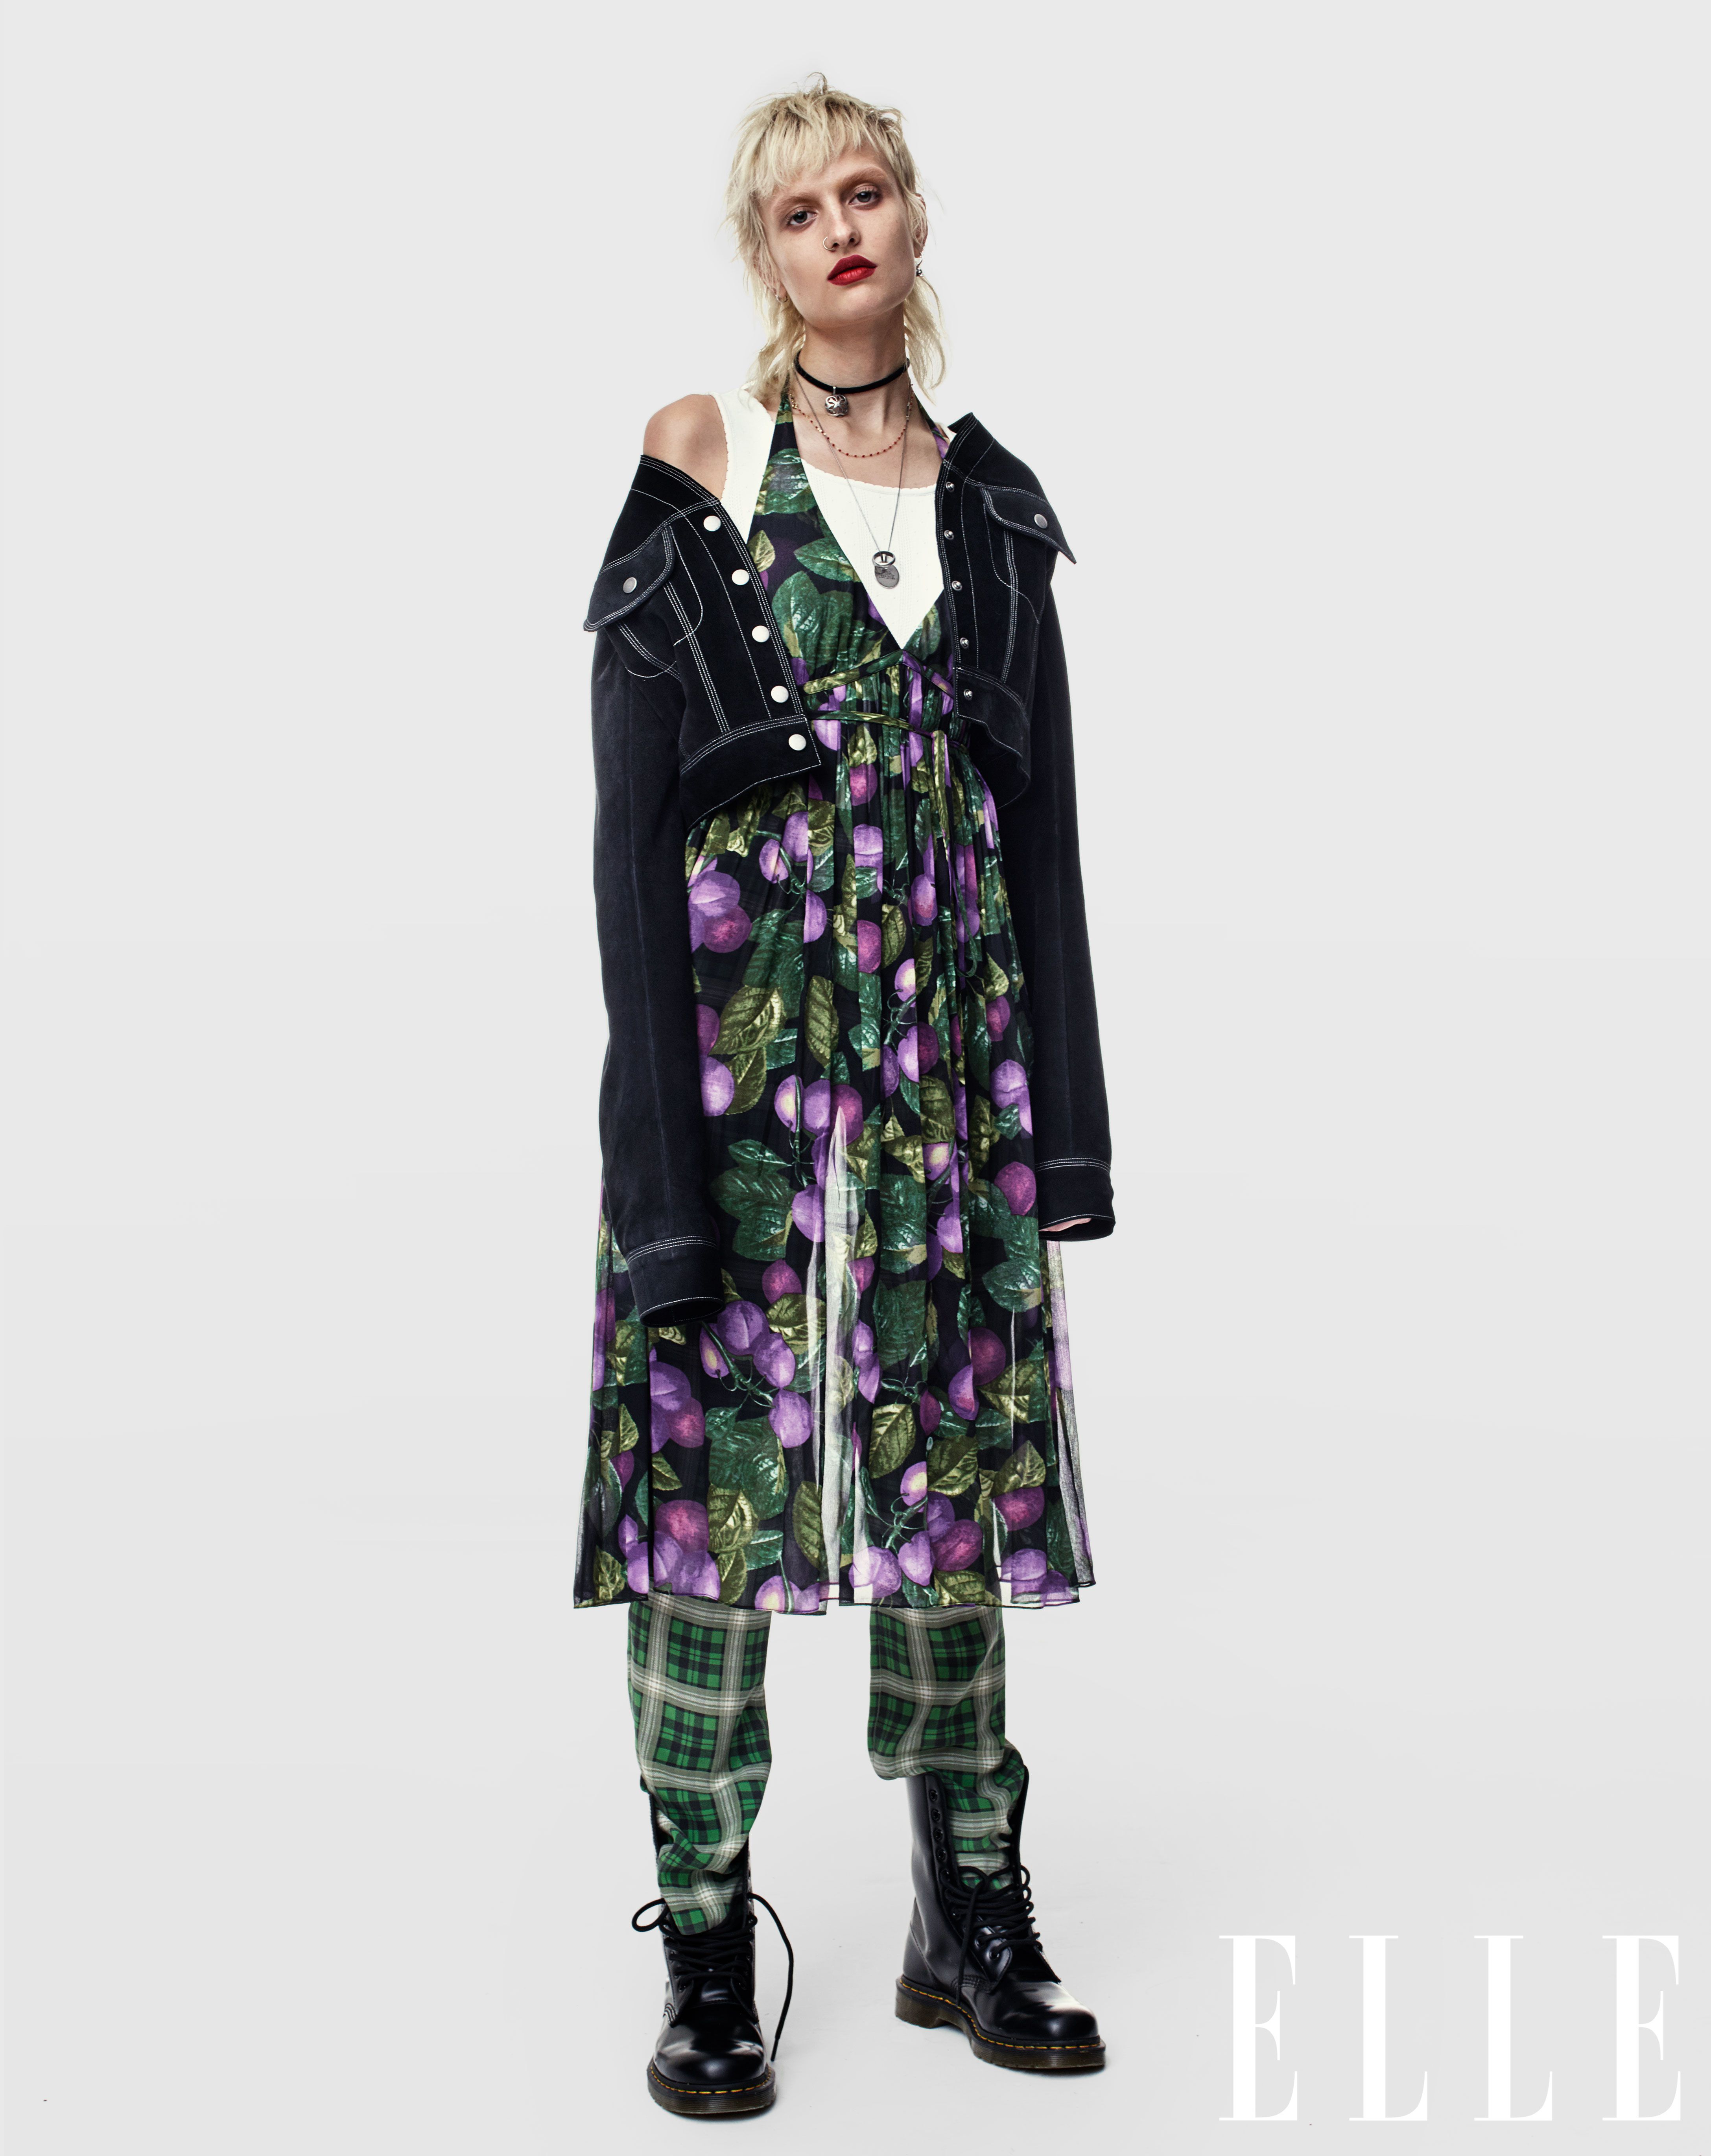 Marc Jacobs's Grunge Collection for Perry Ellis Is Back! See Every Look